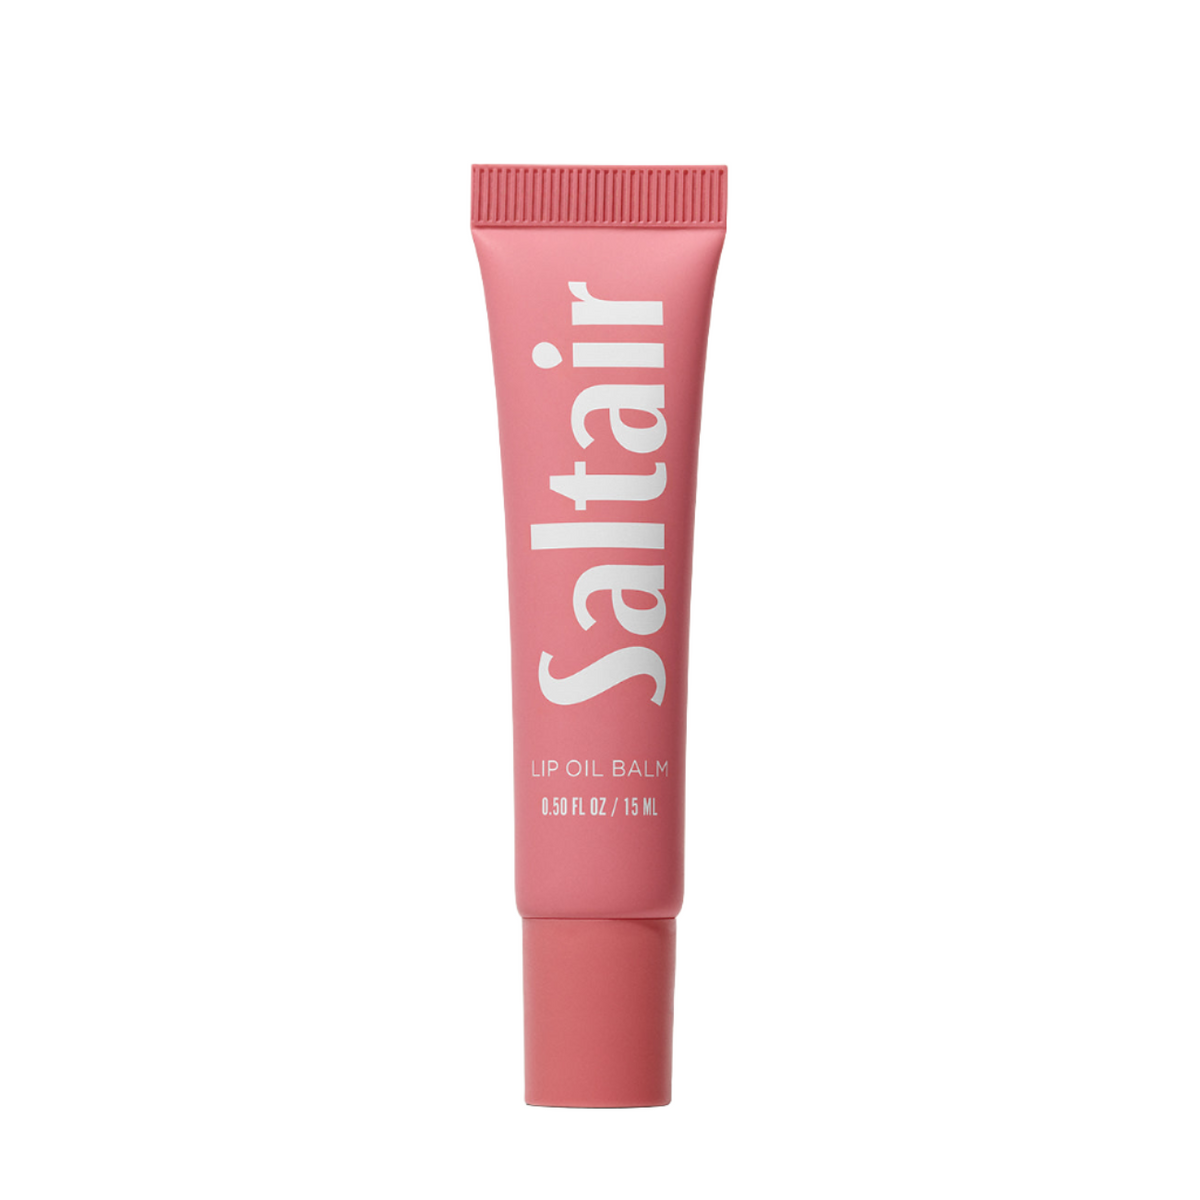 Saltair Lip Oil Balm With Coconut Oil & Shea Butter Lip butter palm Volare Makeup   